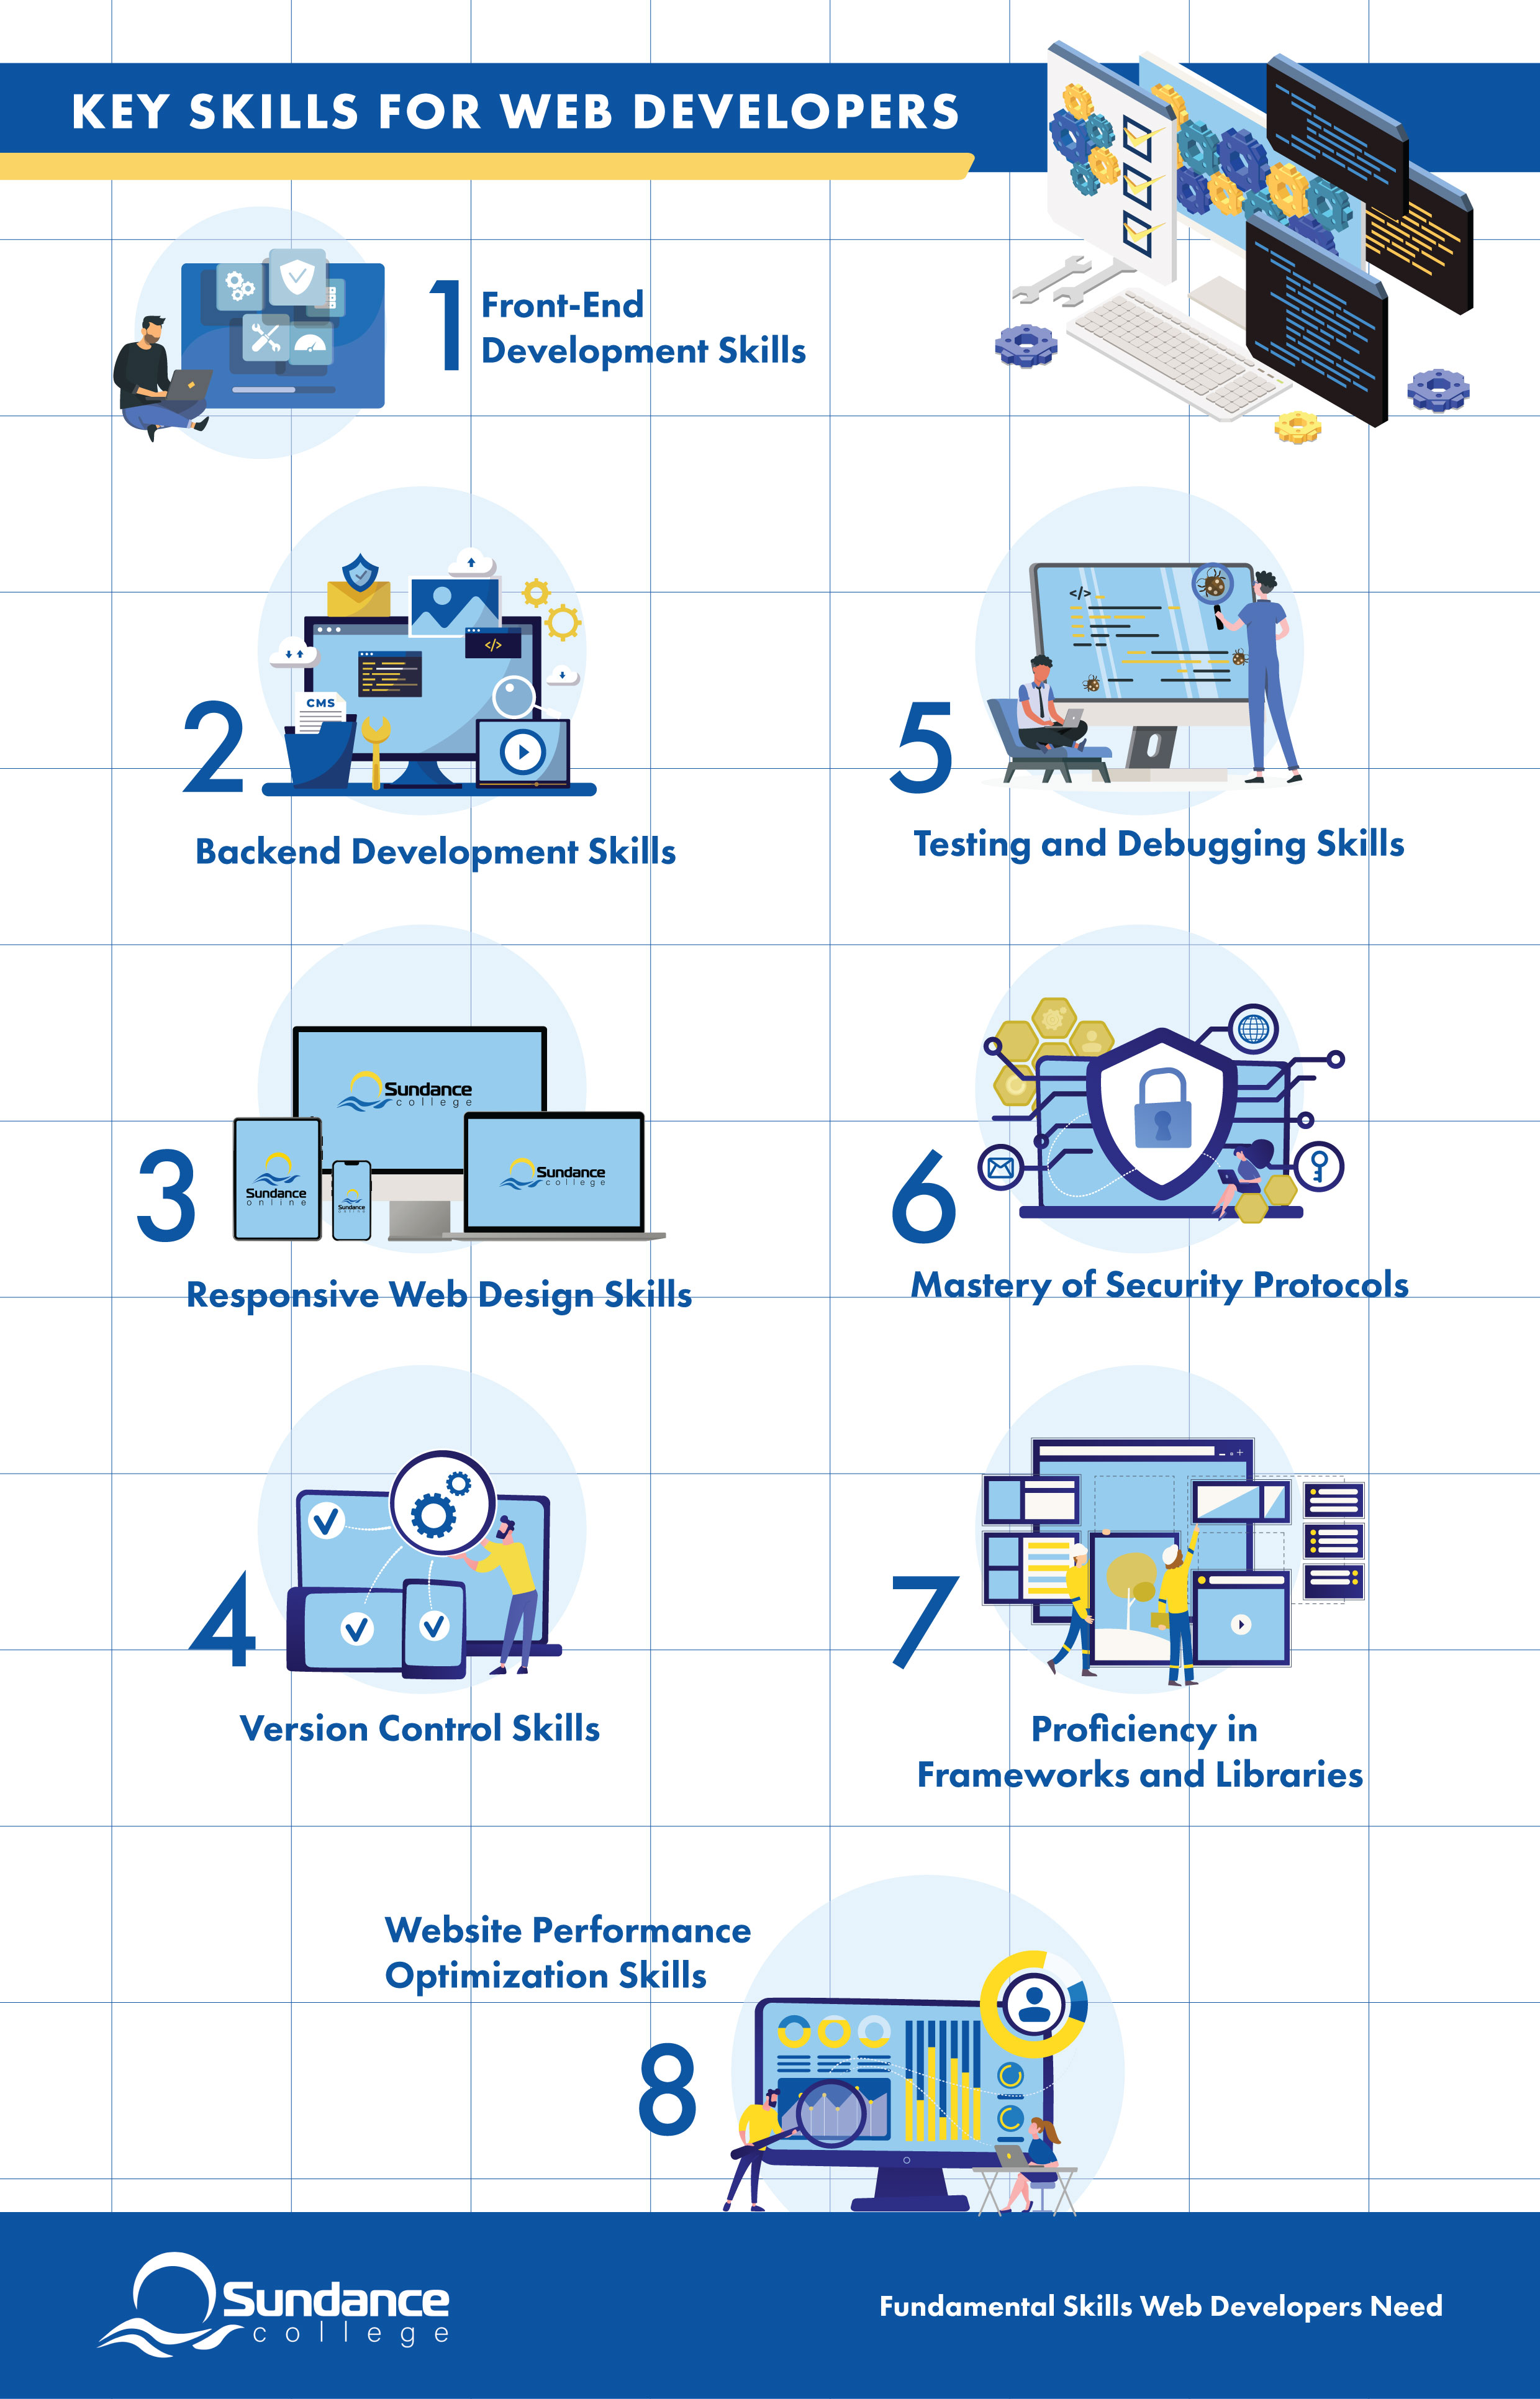 An infographic made by Sundance College about the key skills for web developers including front-end development skills, backend development skills, version control skills, responsive web design skills, testing and debugging skills, mastery of security protocols, proficiency in frameworks and libraries, and website performance optimization skills.